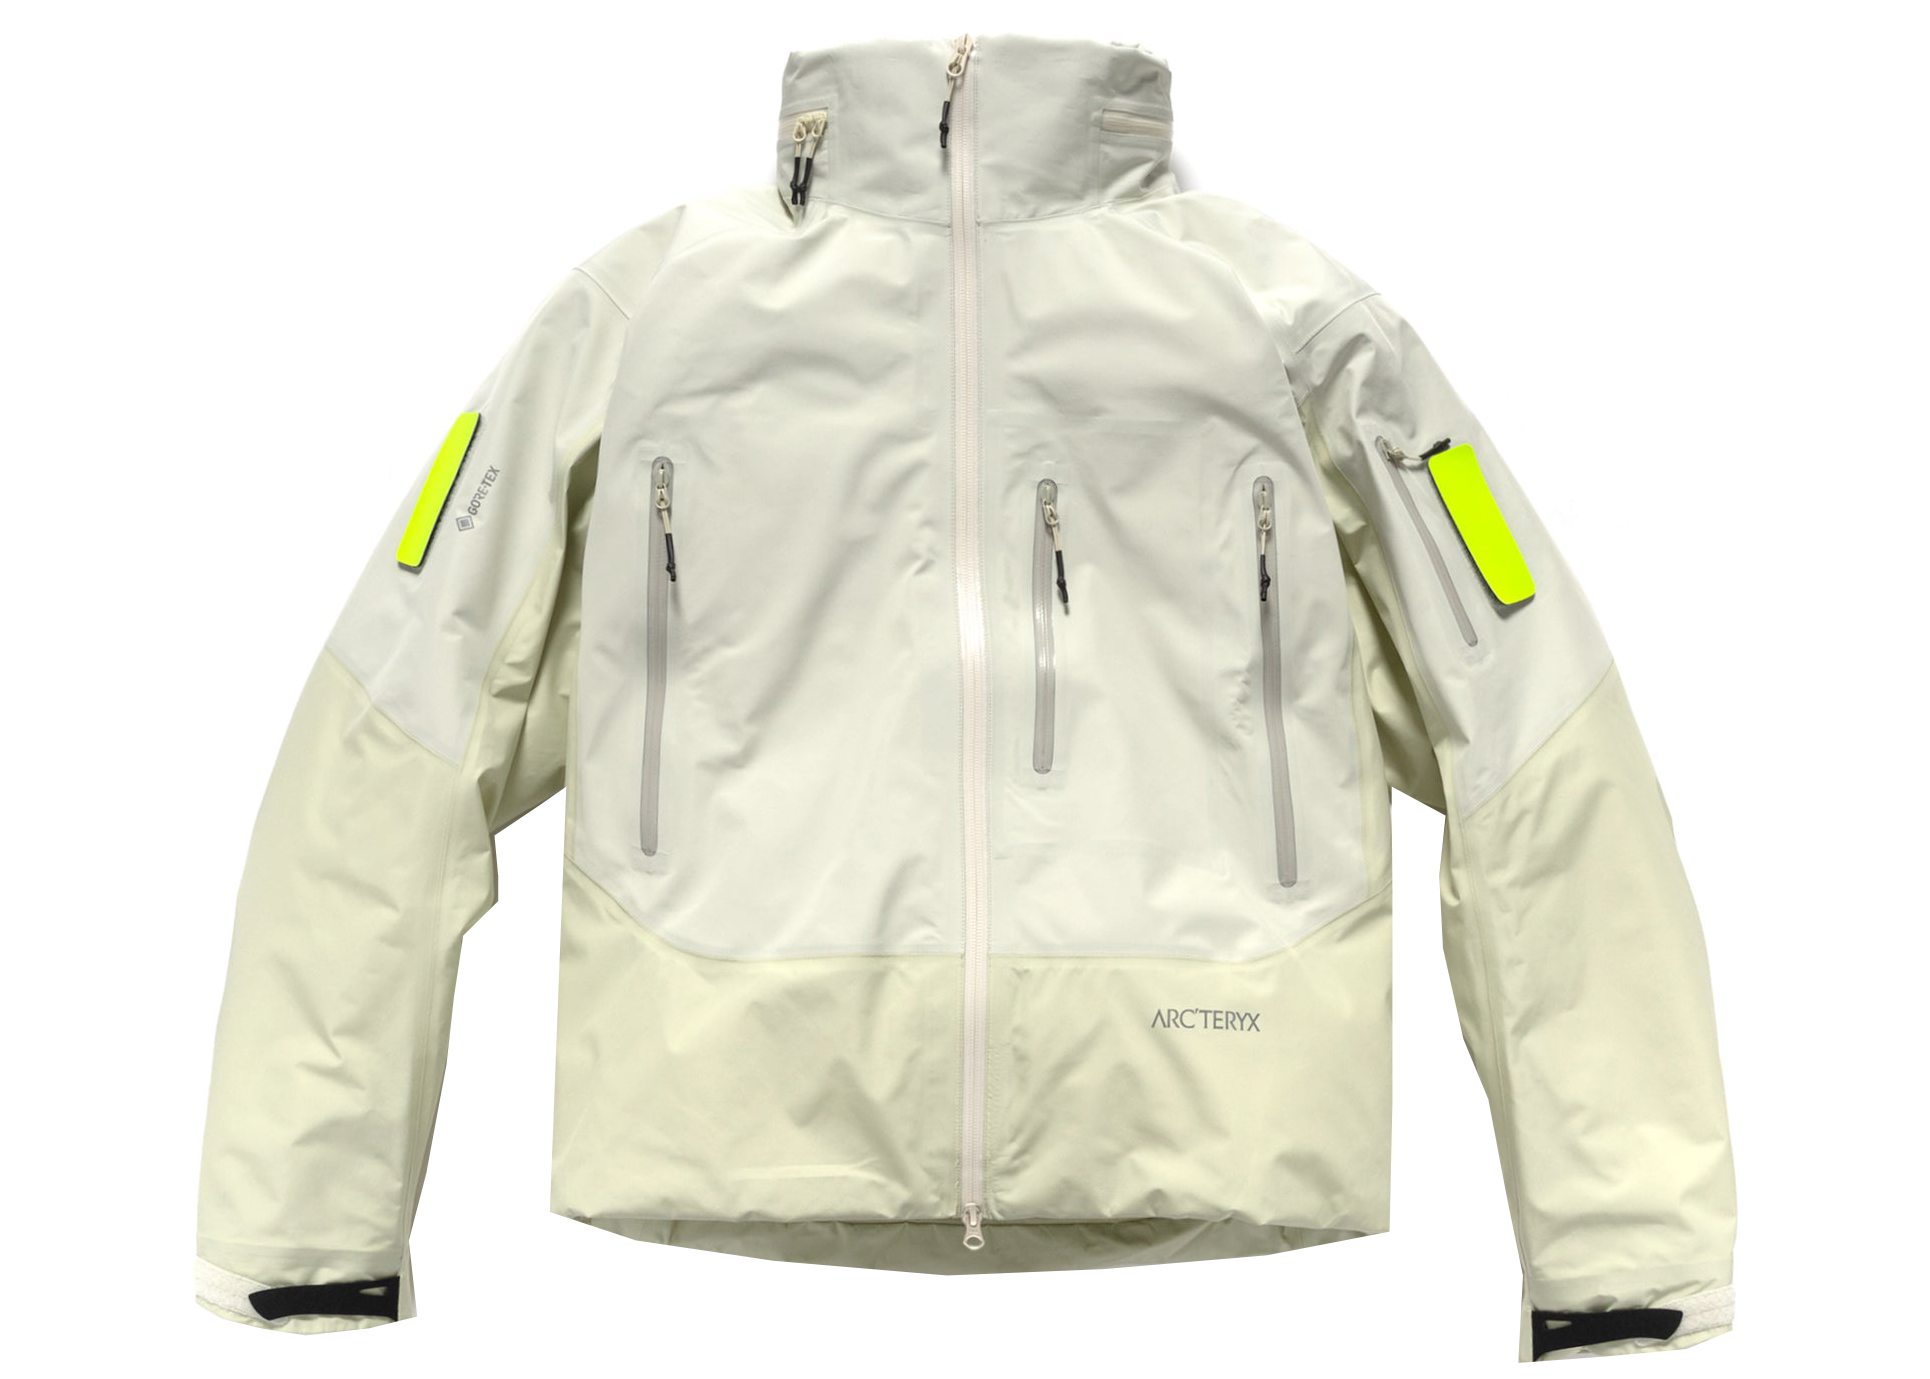 AXIS INSULATED Jacket System_A Arcteryx